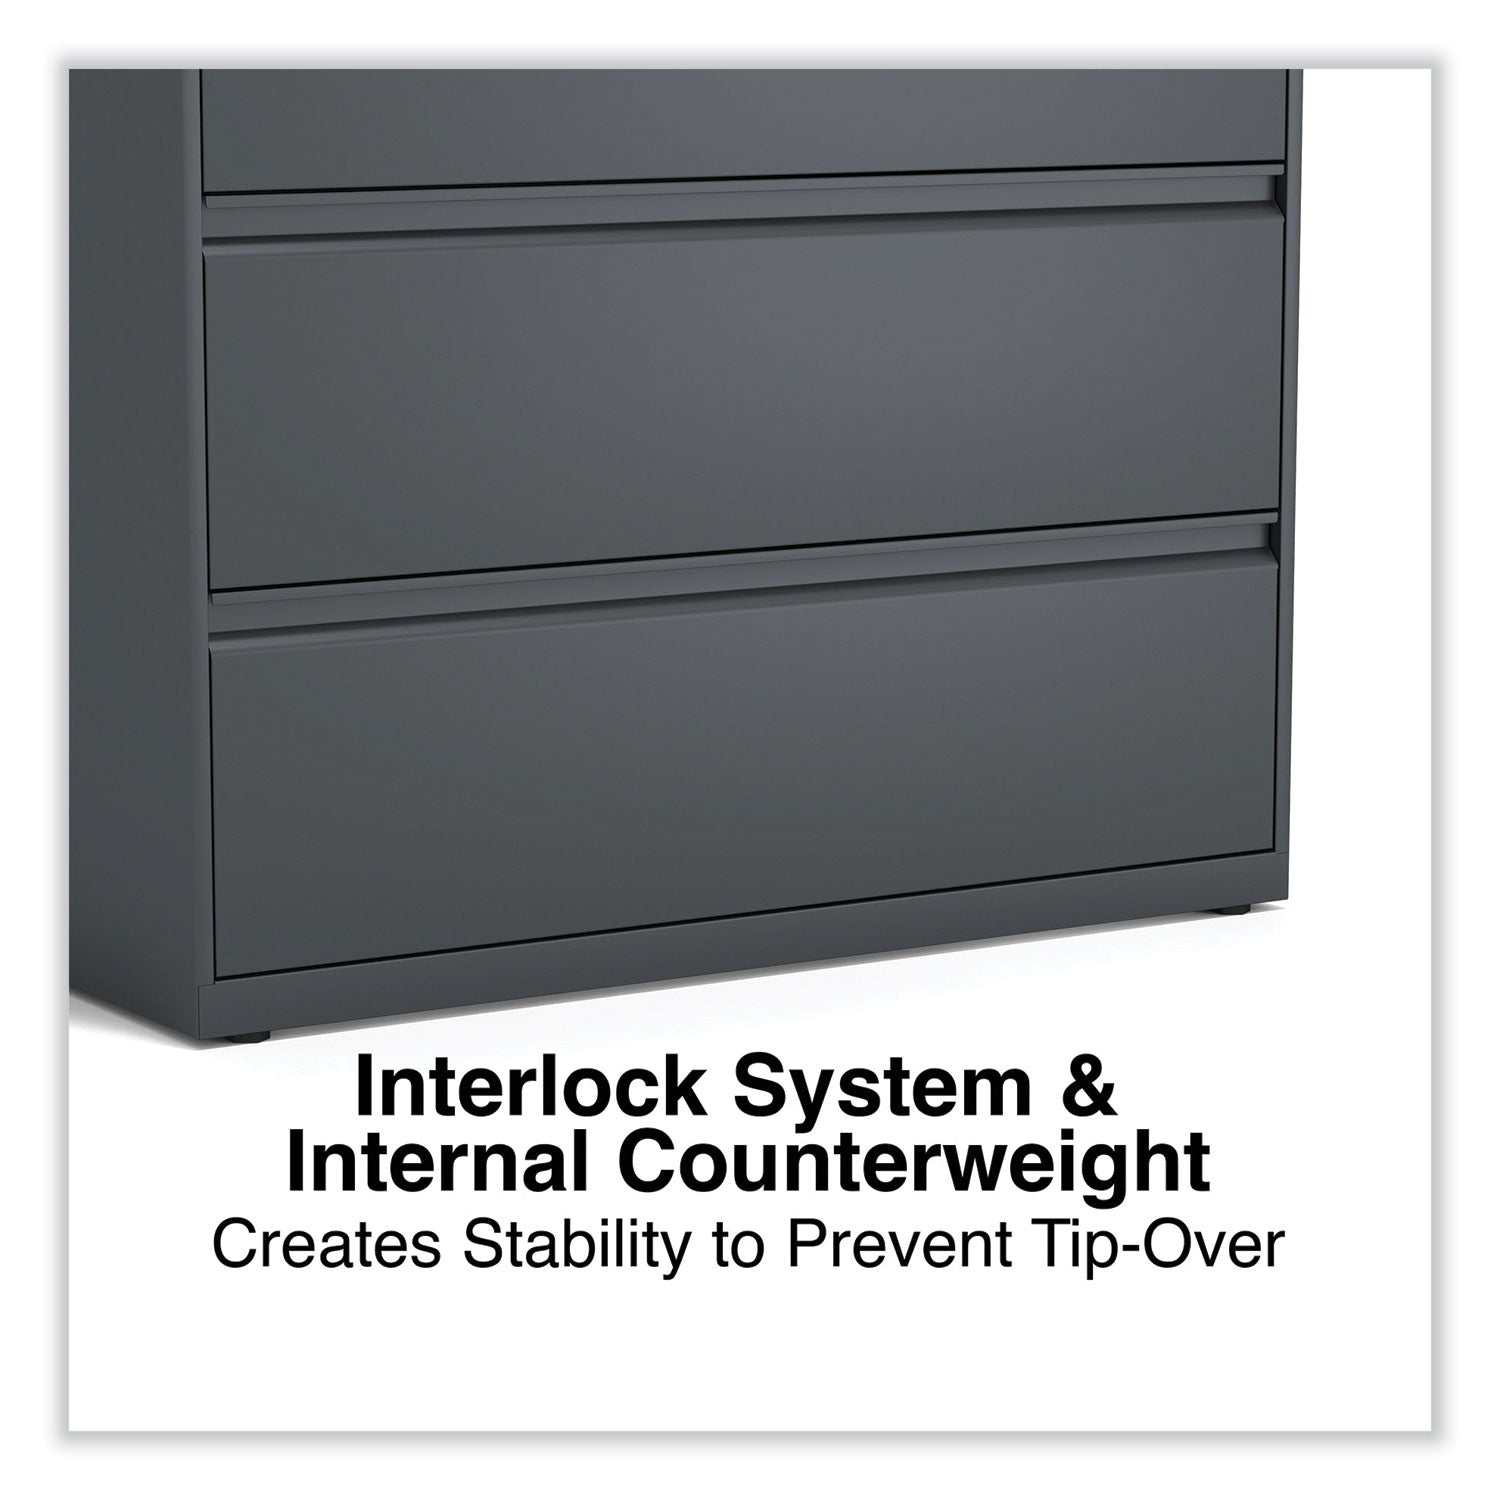 Lateral File, 3 Legal/Letter/A4/A5-Size File Drawers, Charcoal, 42" x 18.63" x 40.25"